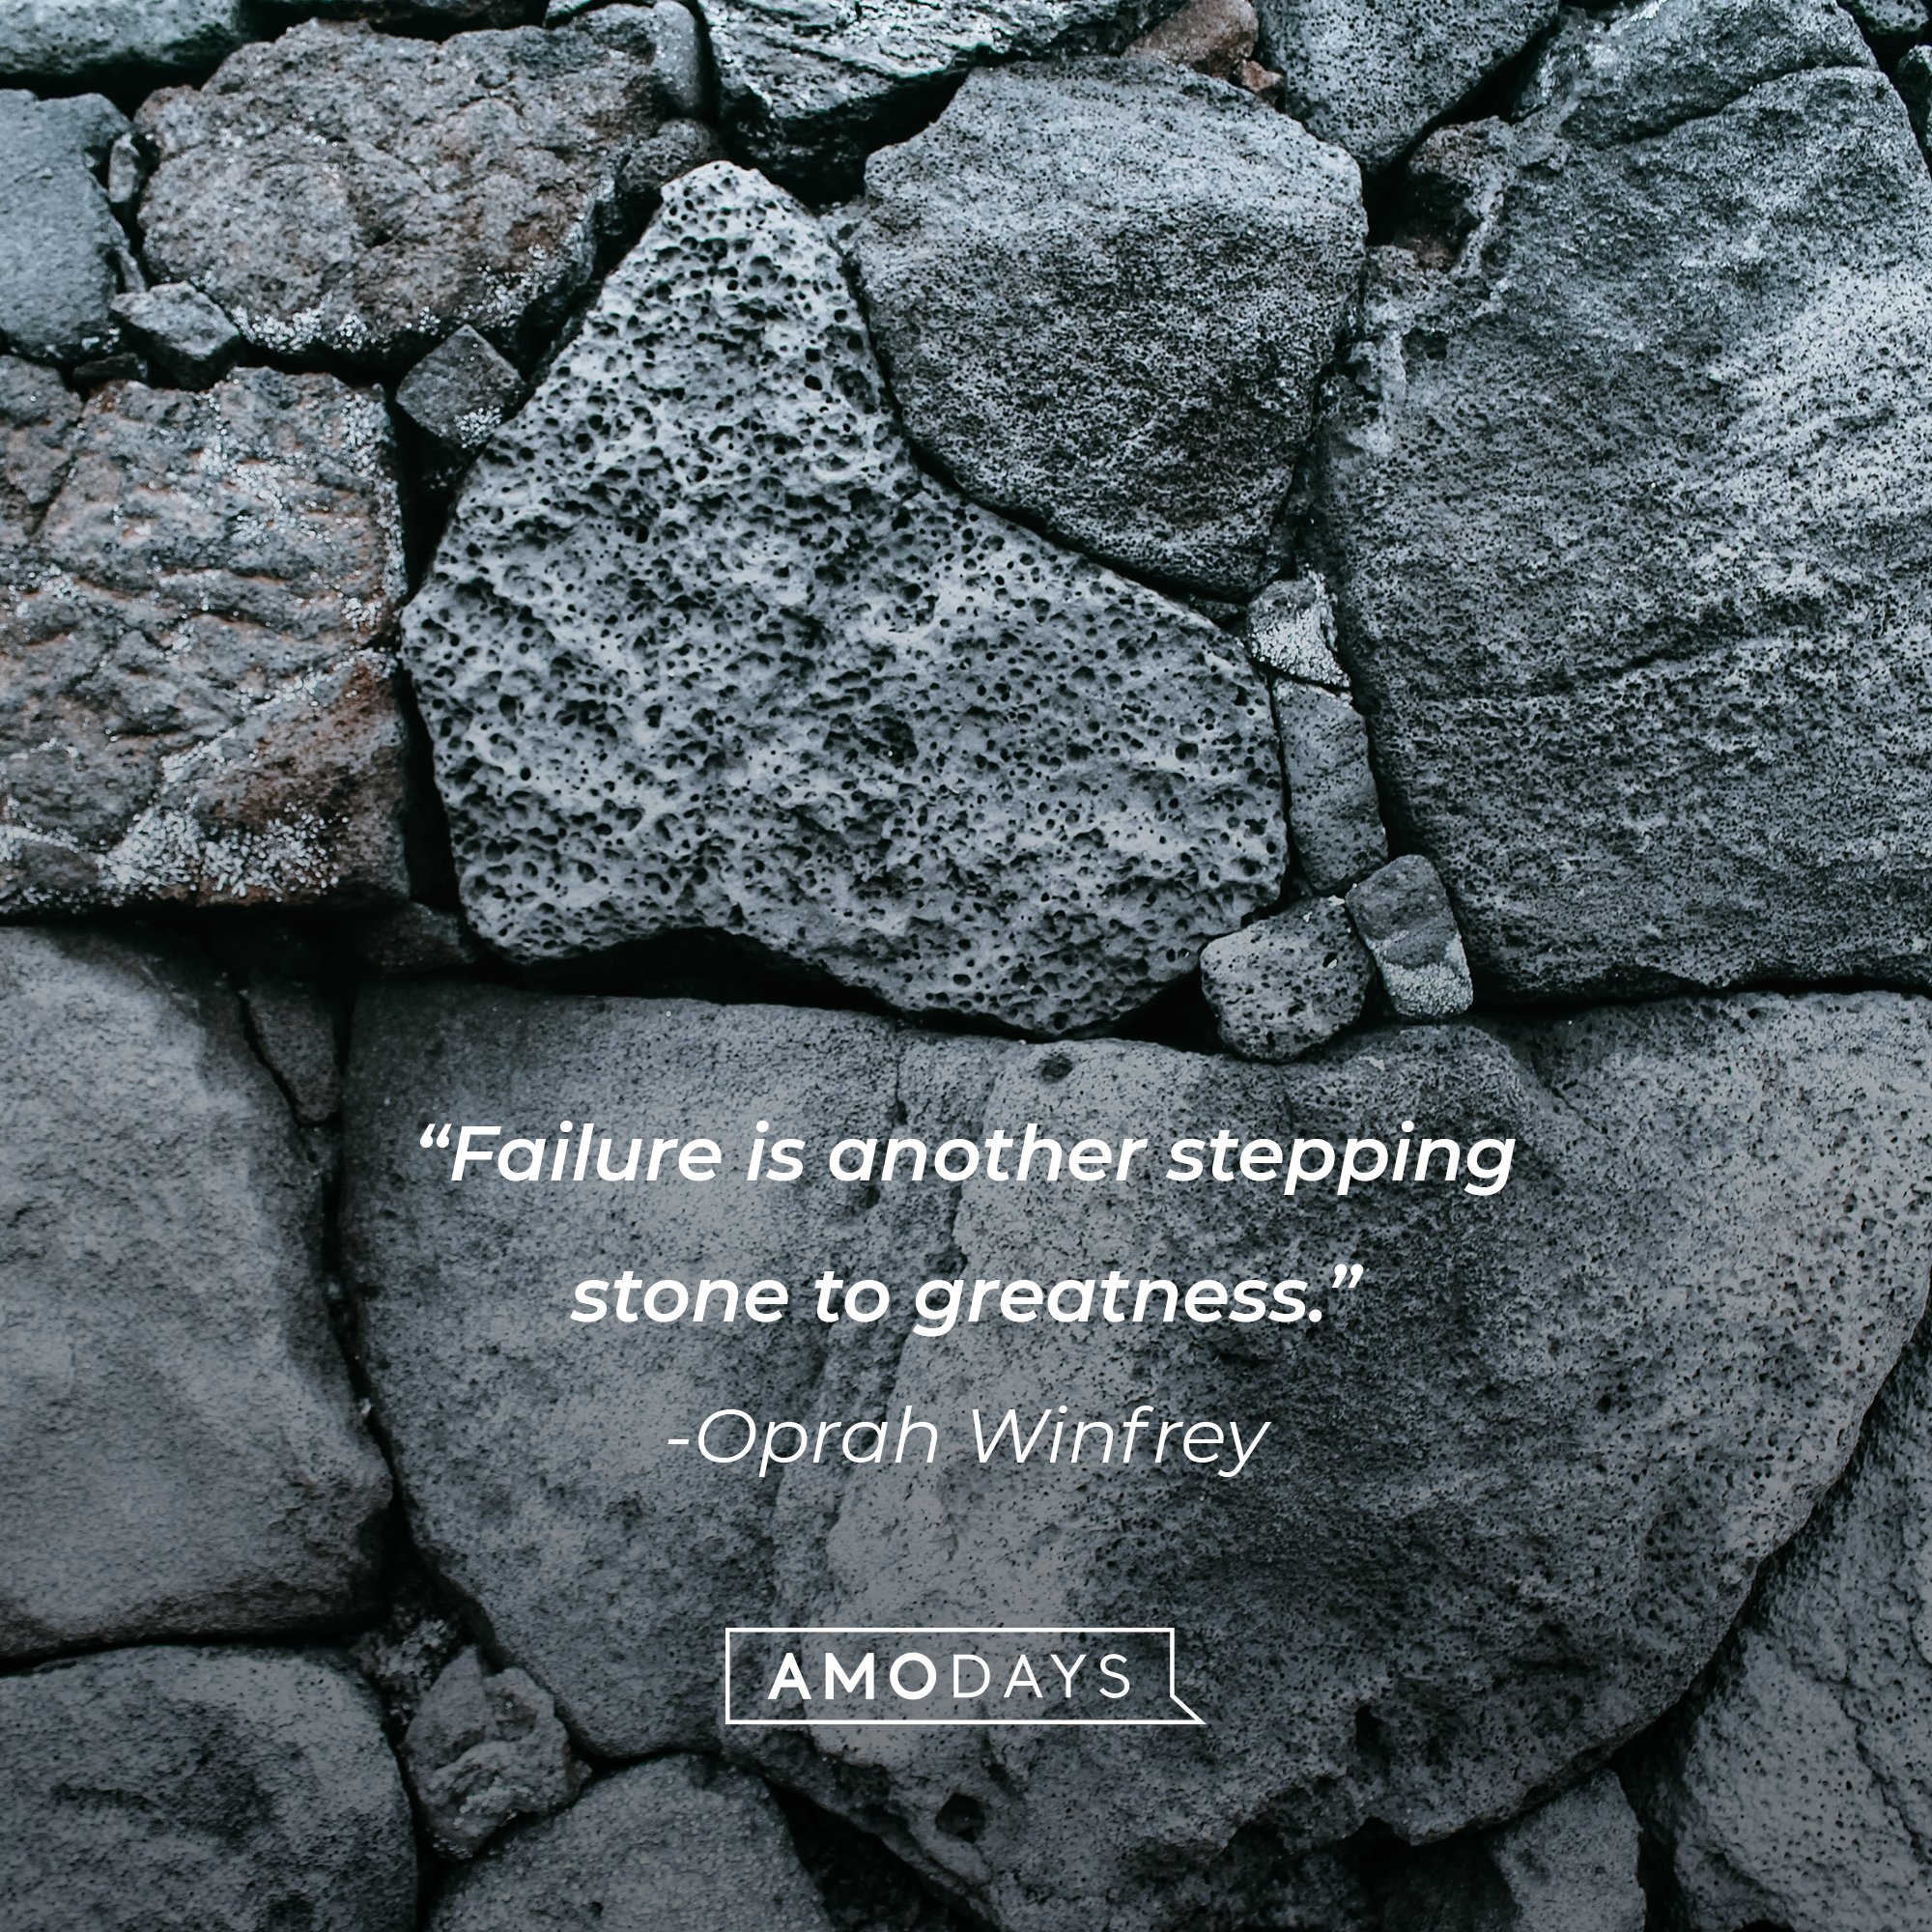 Oprah Winfrey's quote: "Failure is another stepping stone to greatness." | Image: AmoDays